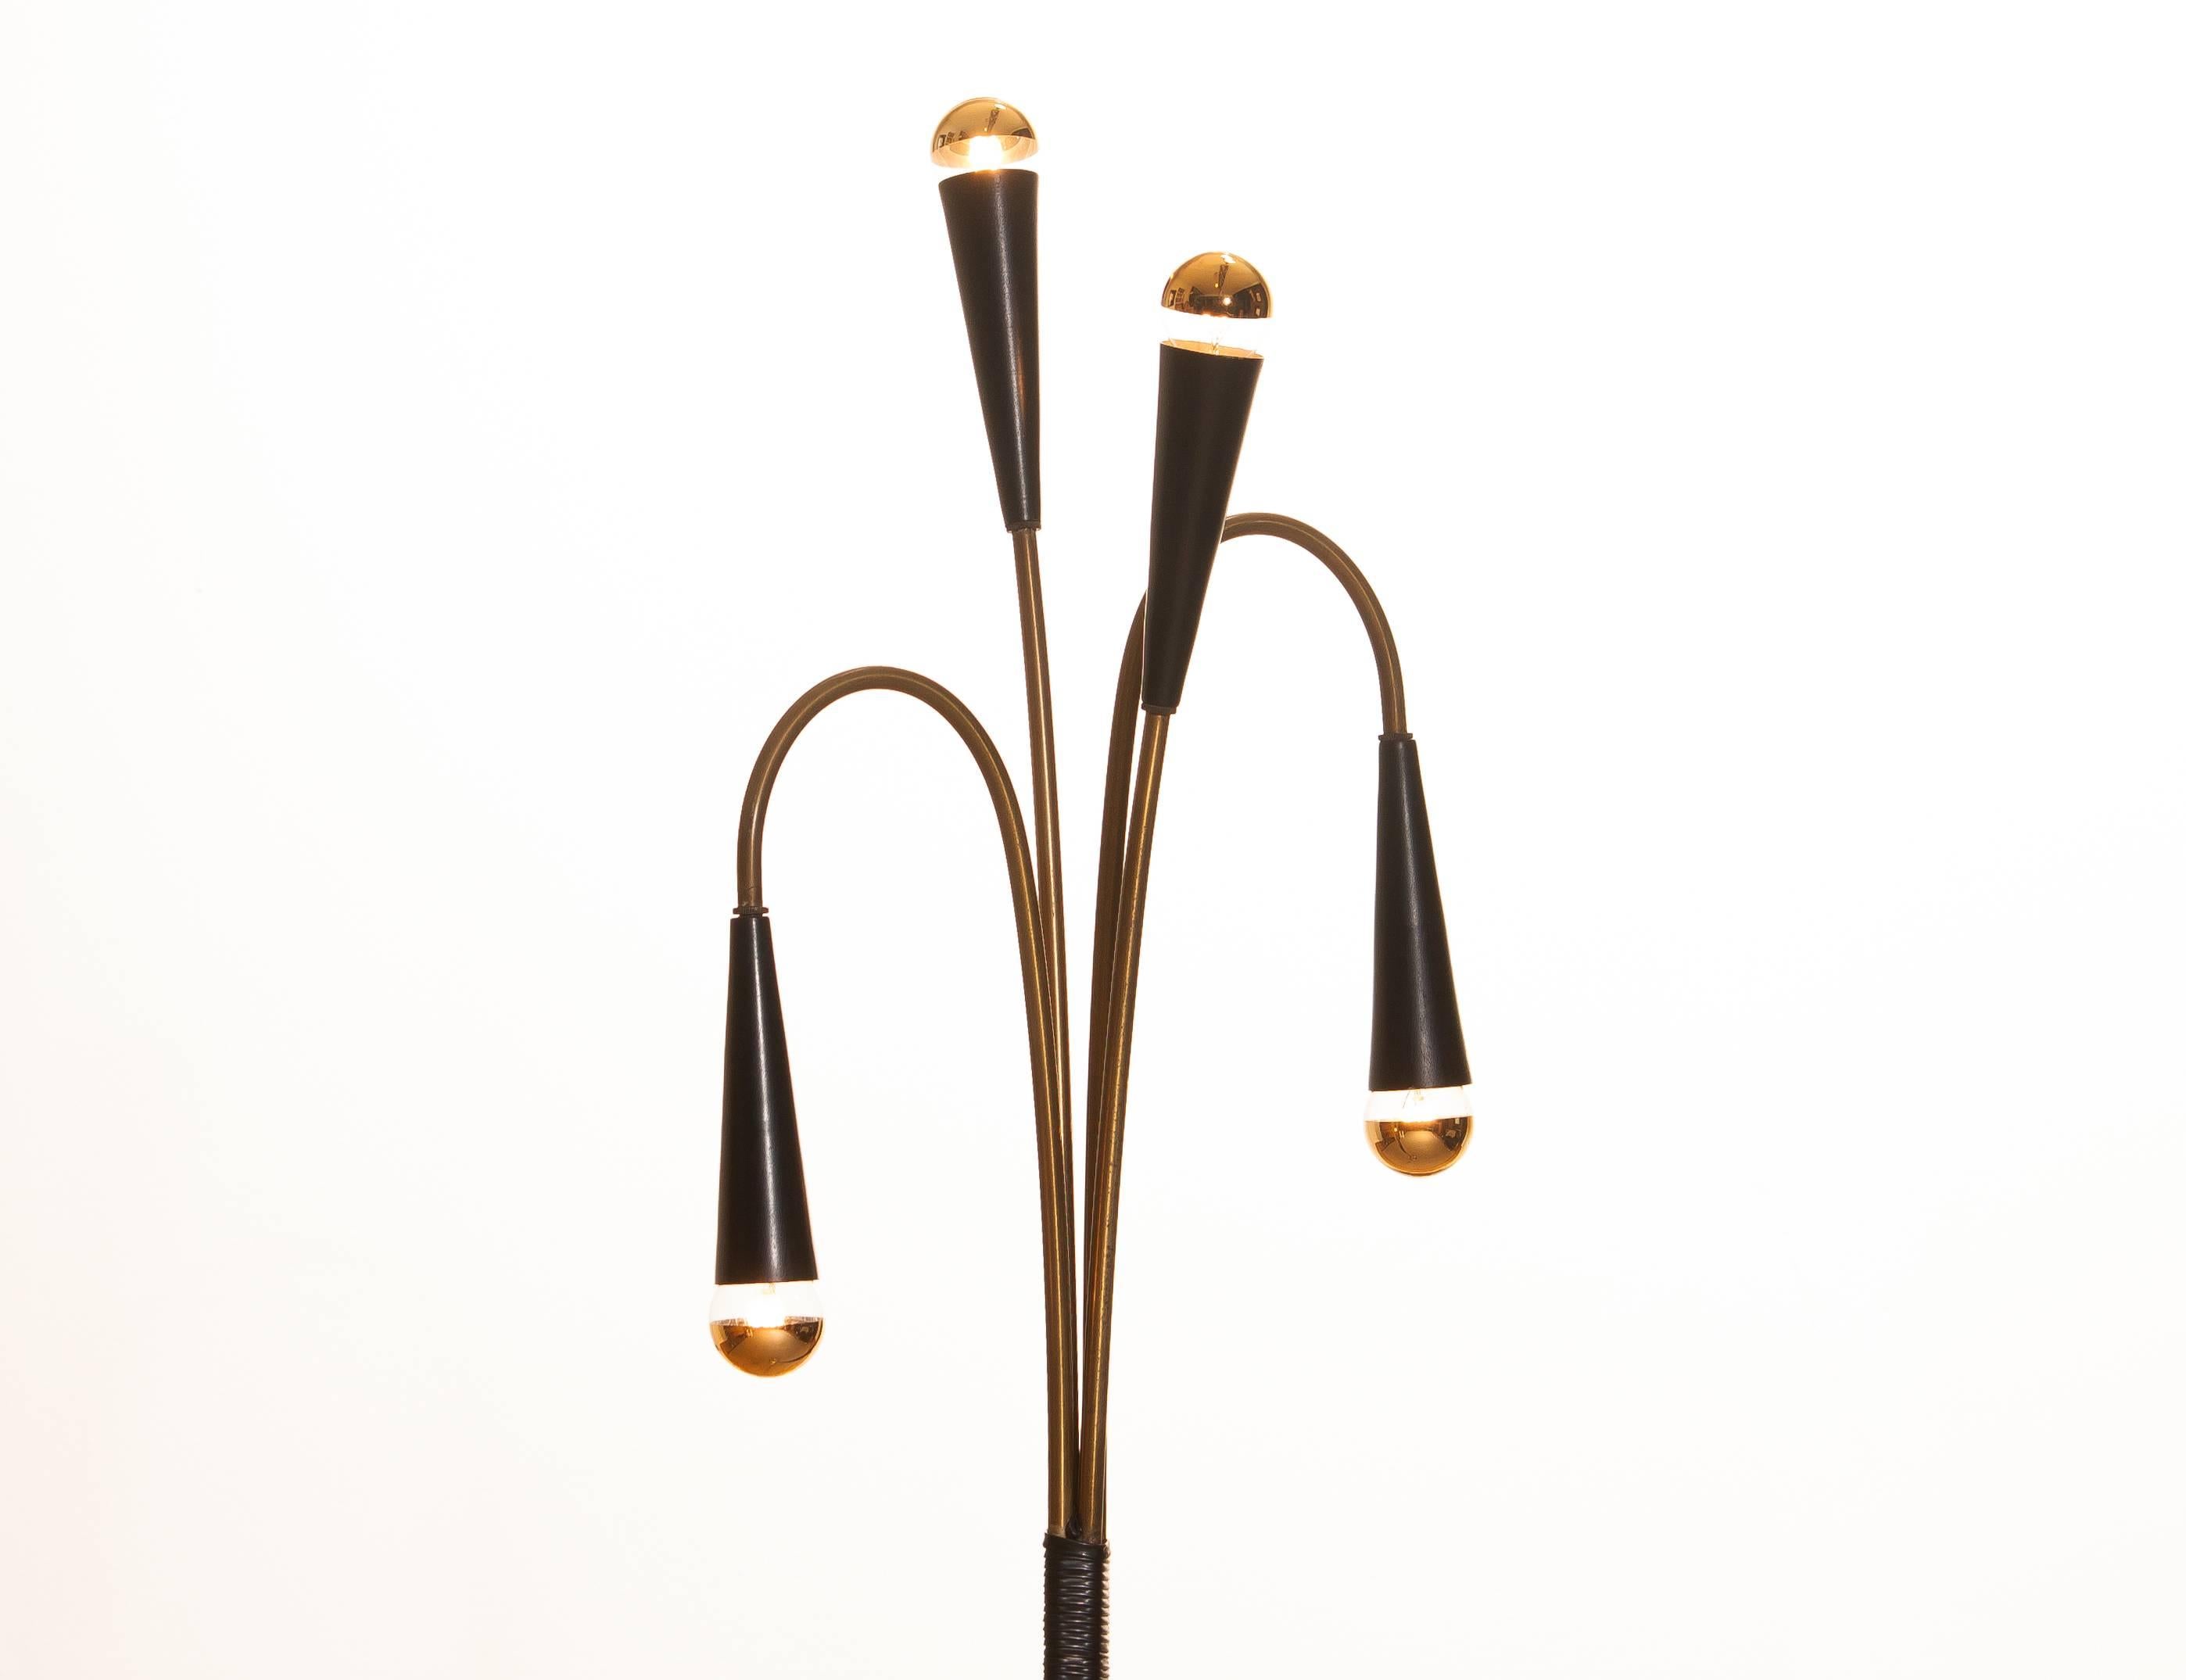 Beautiful floor lamp made by Lumi.
Designed by Oscar Torlasco.
This lamp is made of brass with black lacquered metal details.
It is in an original condition and technical 100%.
Period 1960s
Dimensions H 140 cm, W 39 cm.